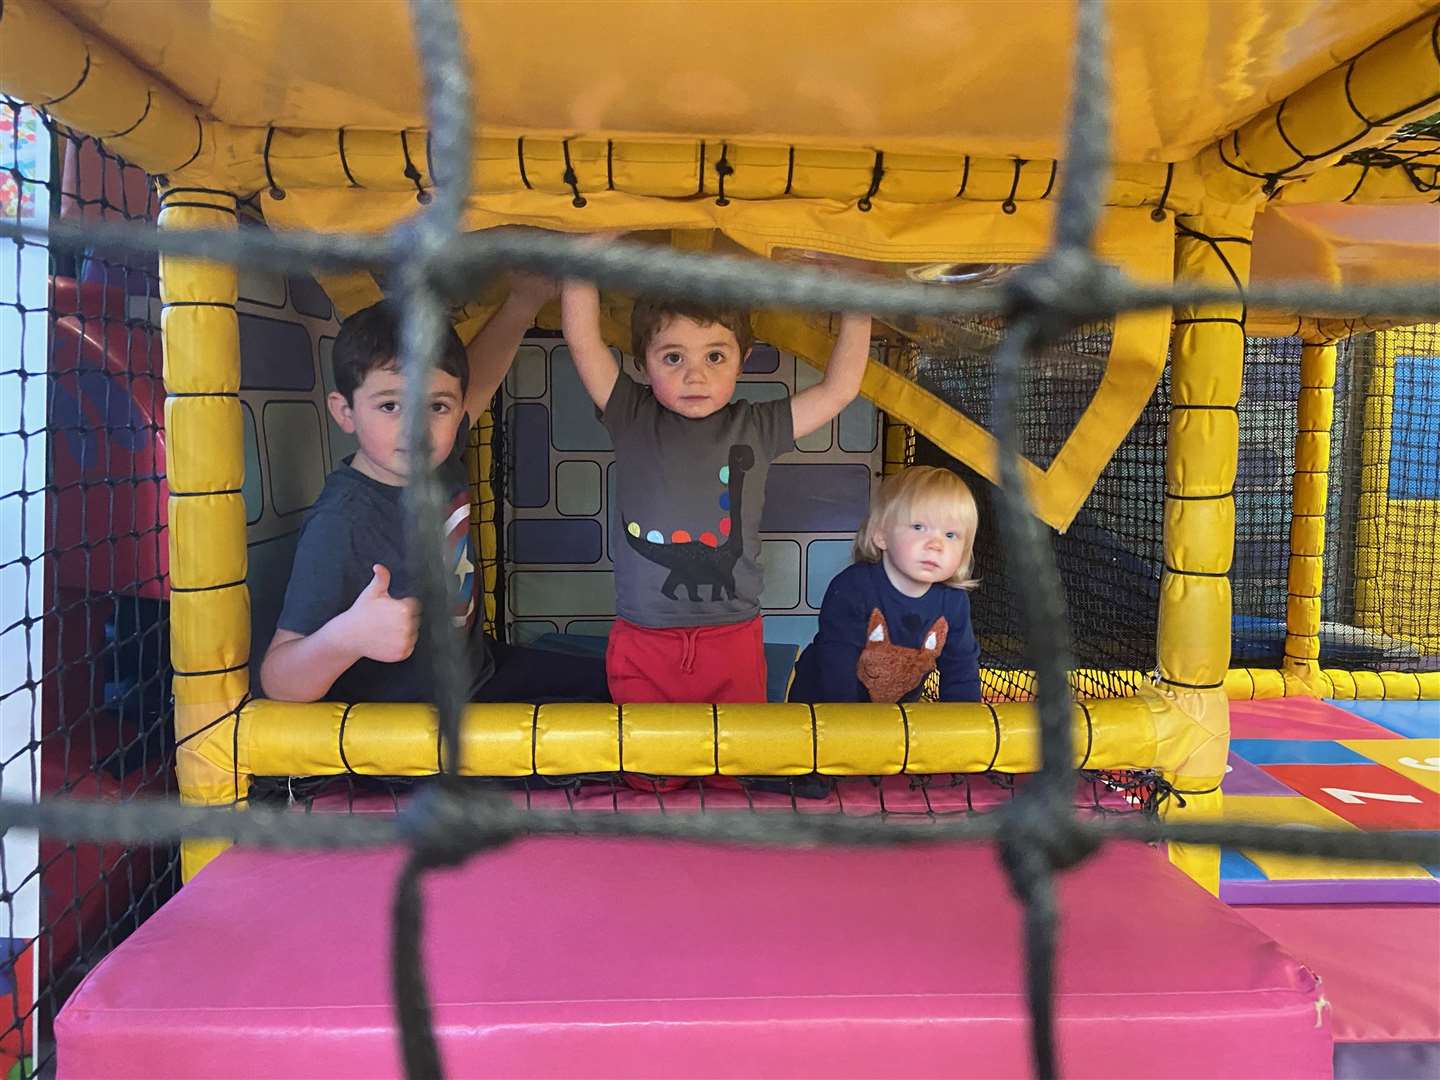 Soft play centres have faced closure and tighter restrictions on numbers when open.